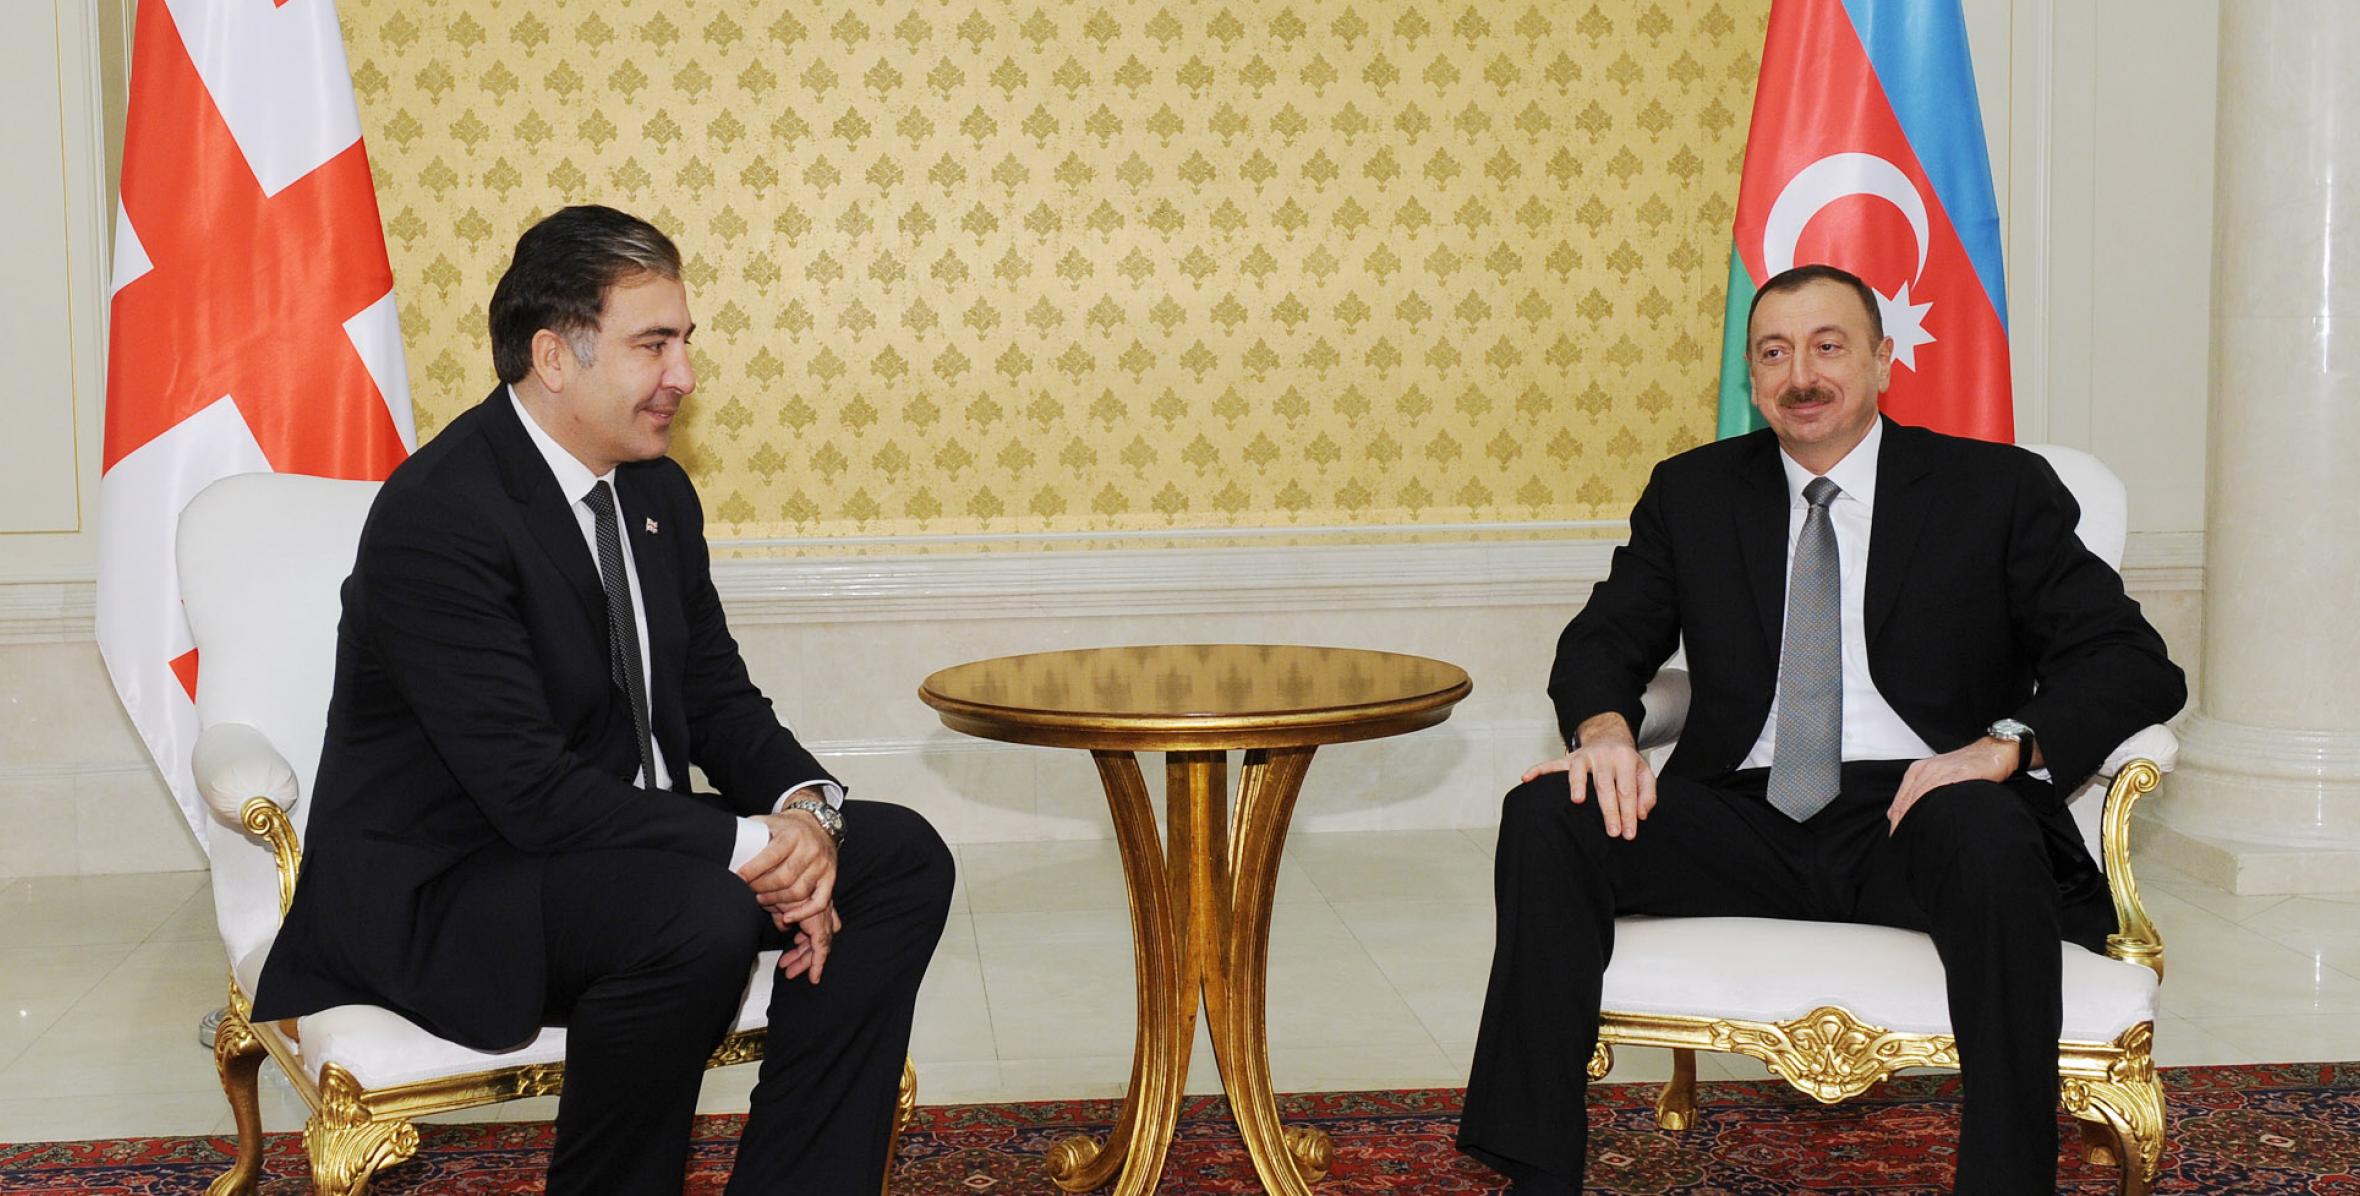 Ilham Aliyev and Mikheil Saakashvili held a face-to-face meeting